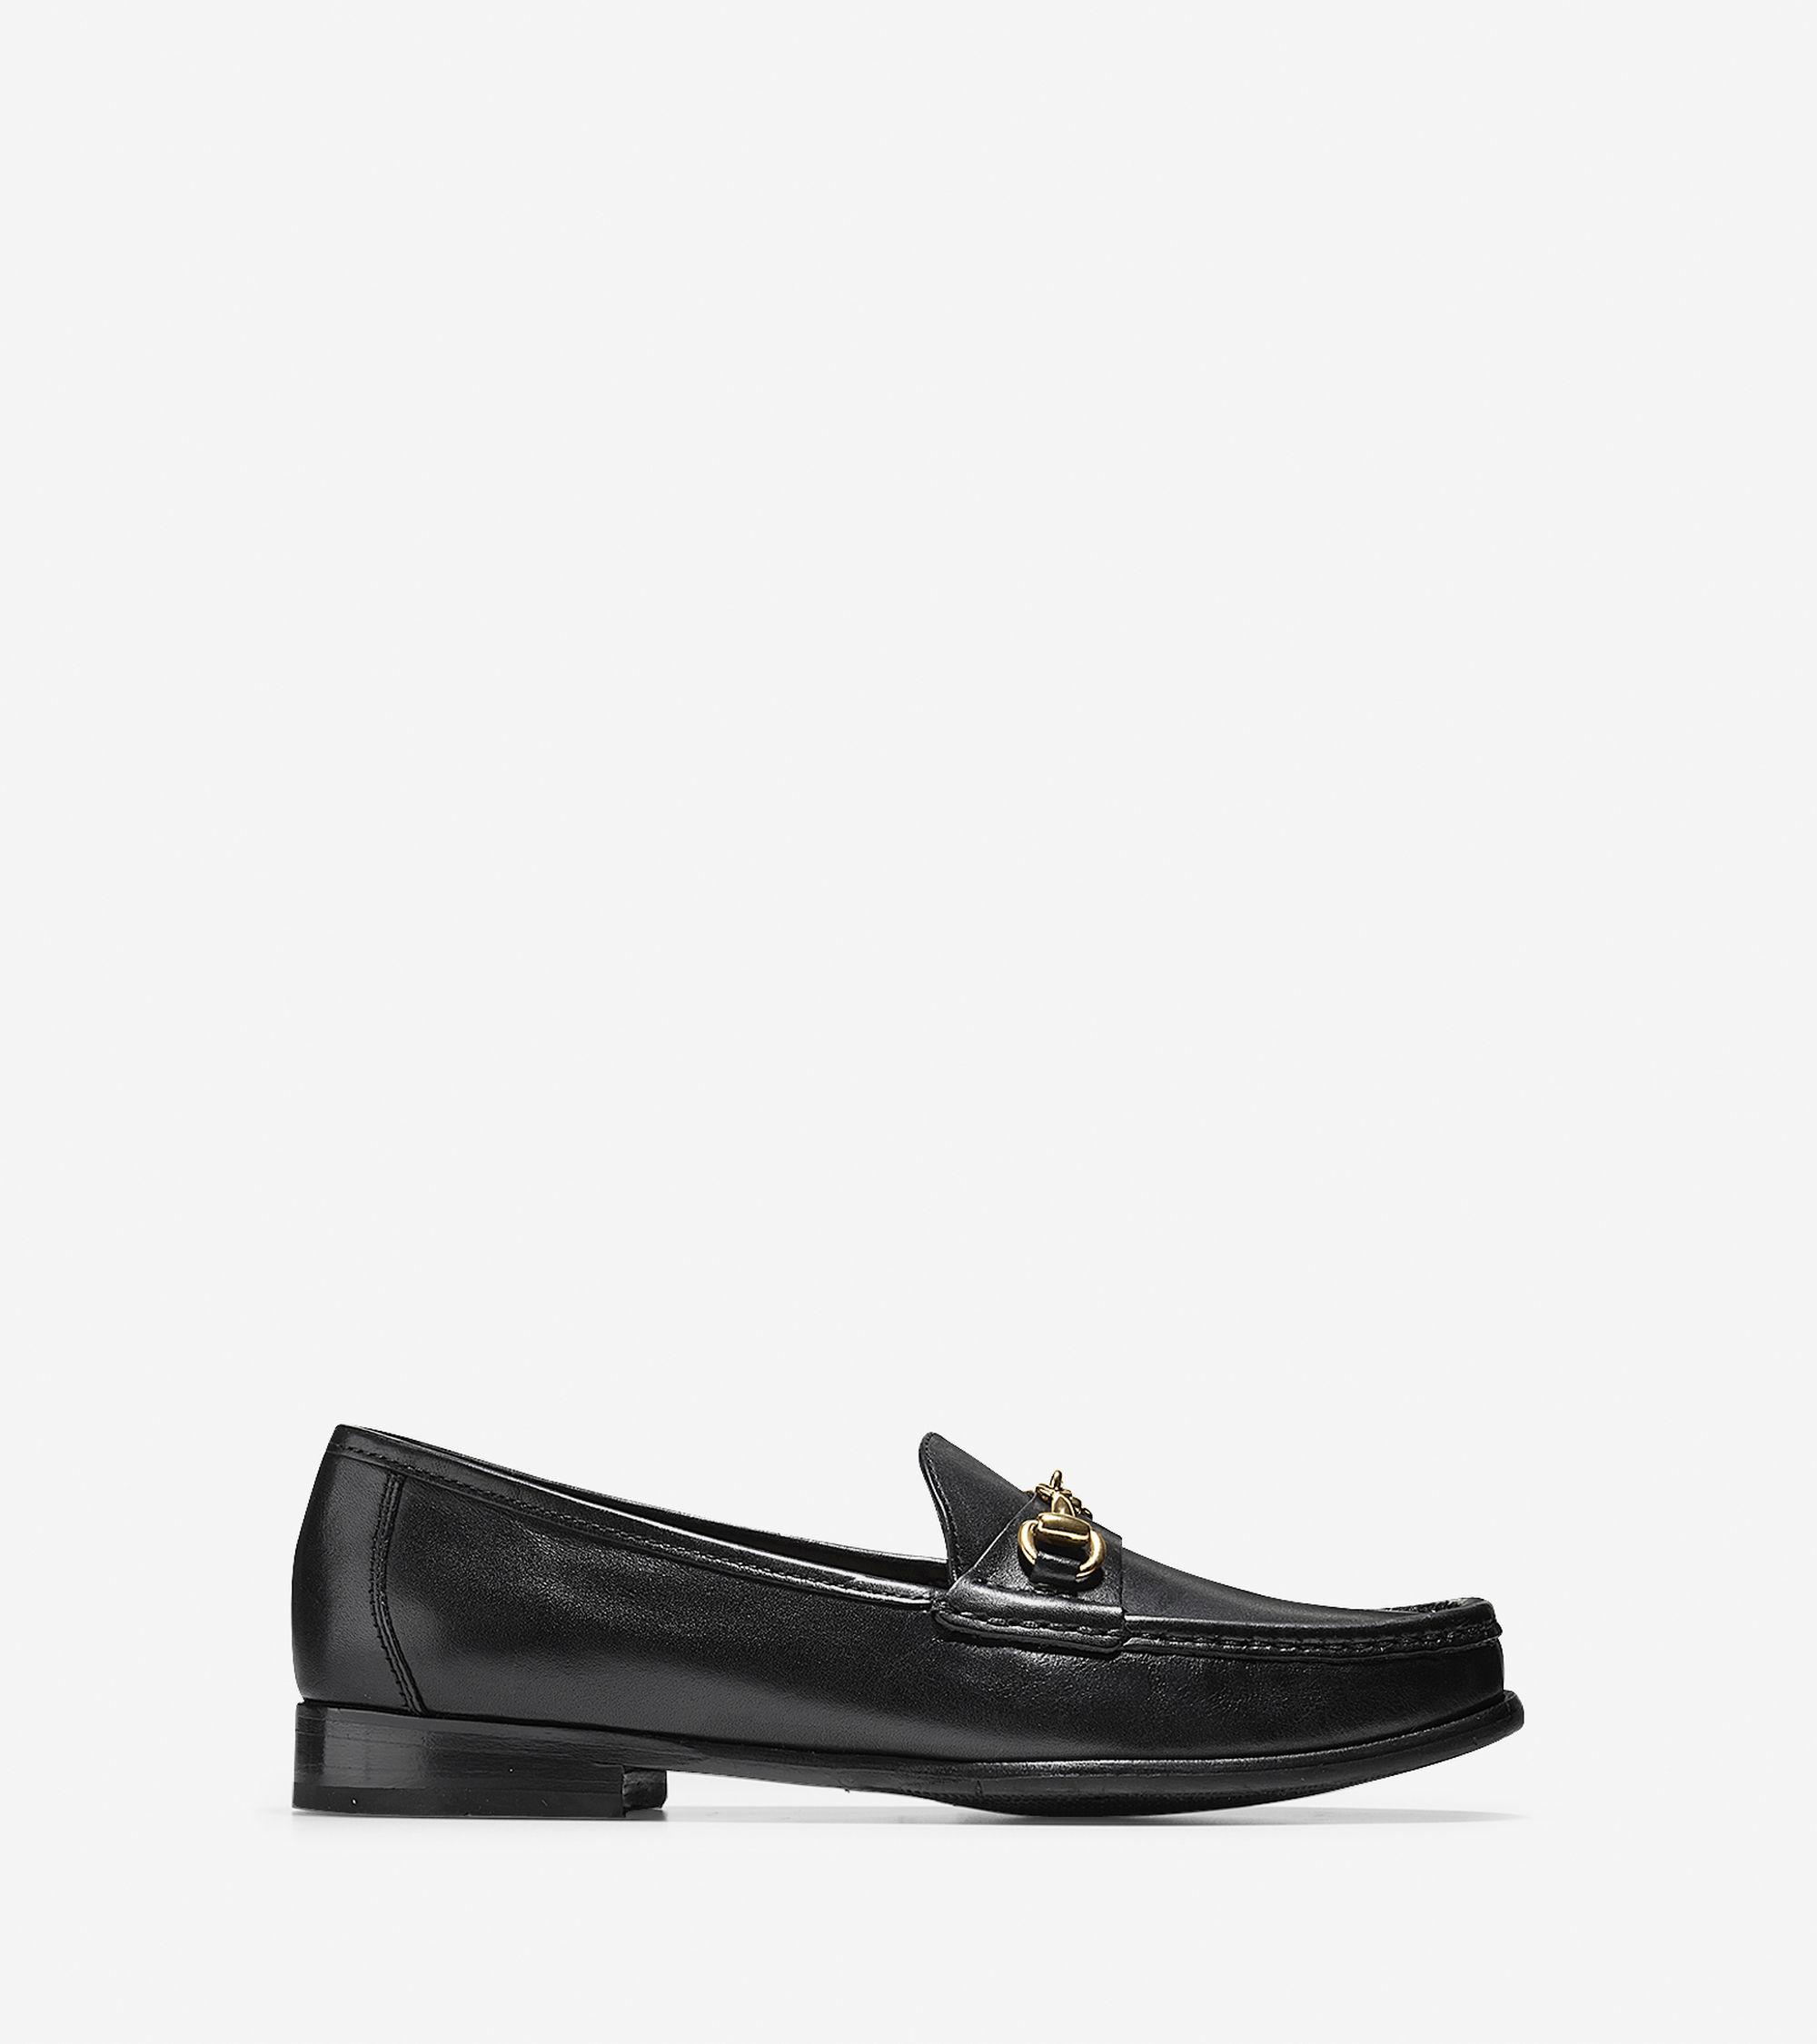 Lyst - Cole haan Ascot Bit Loafer in Black for Men